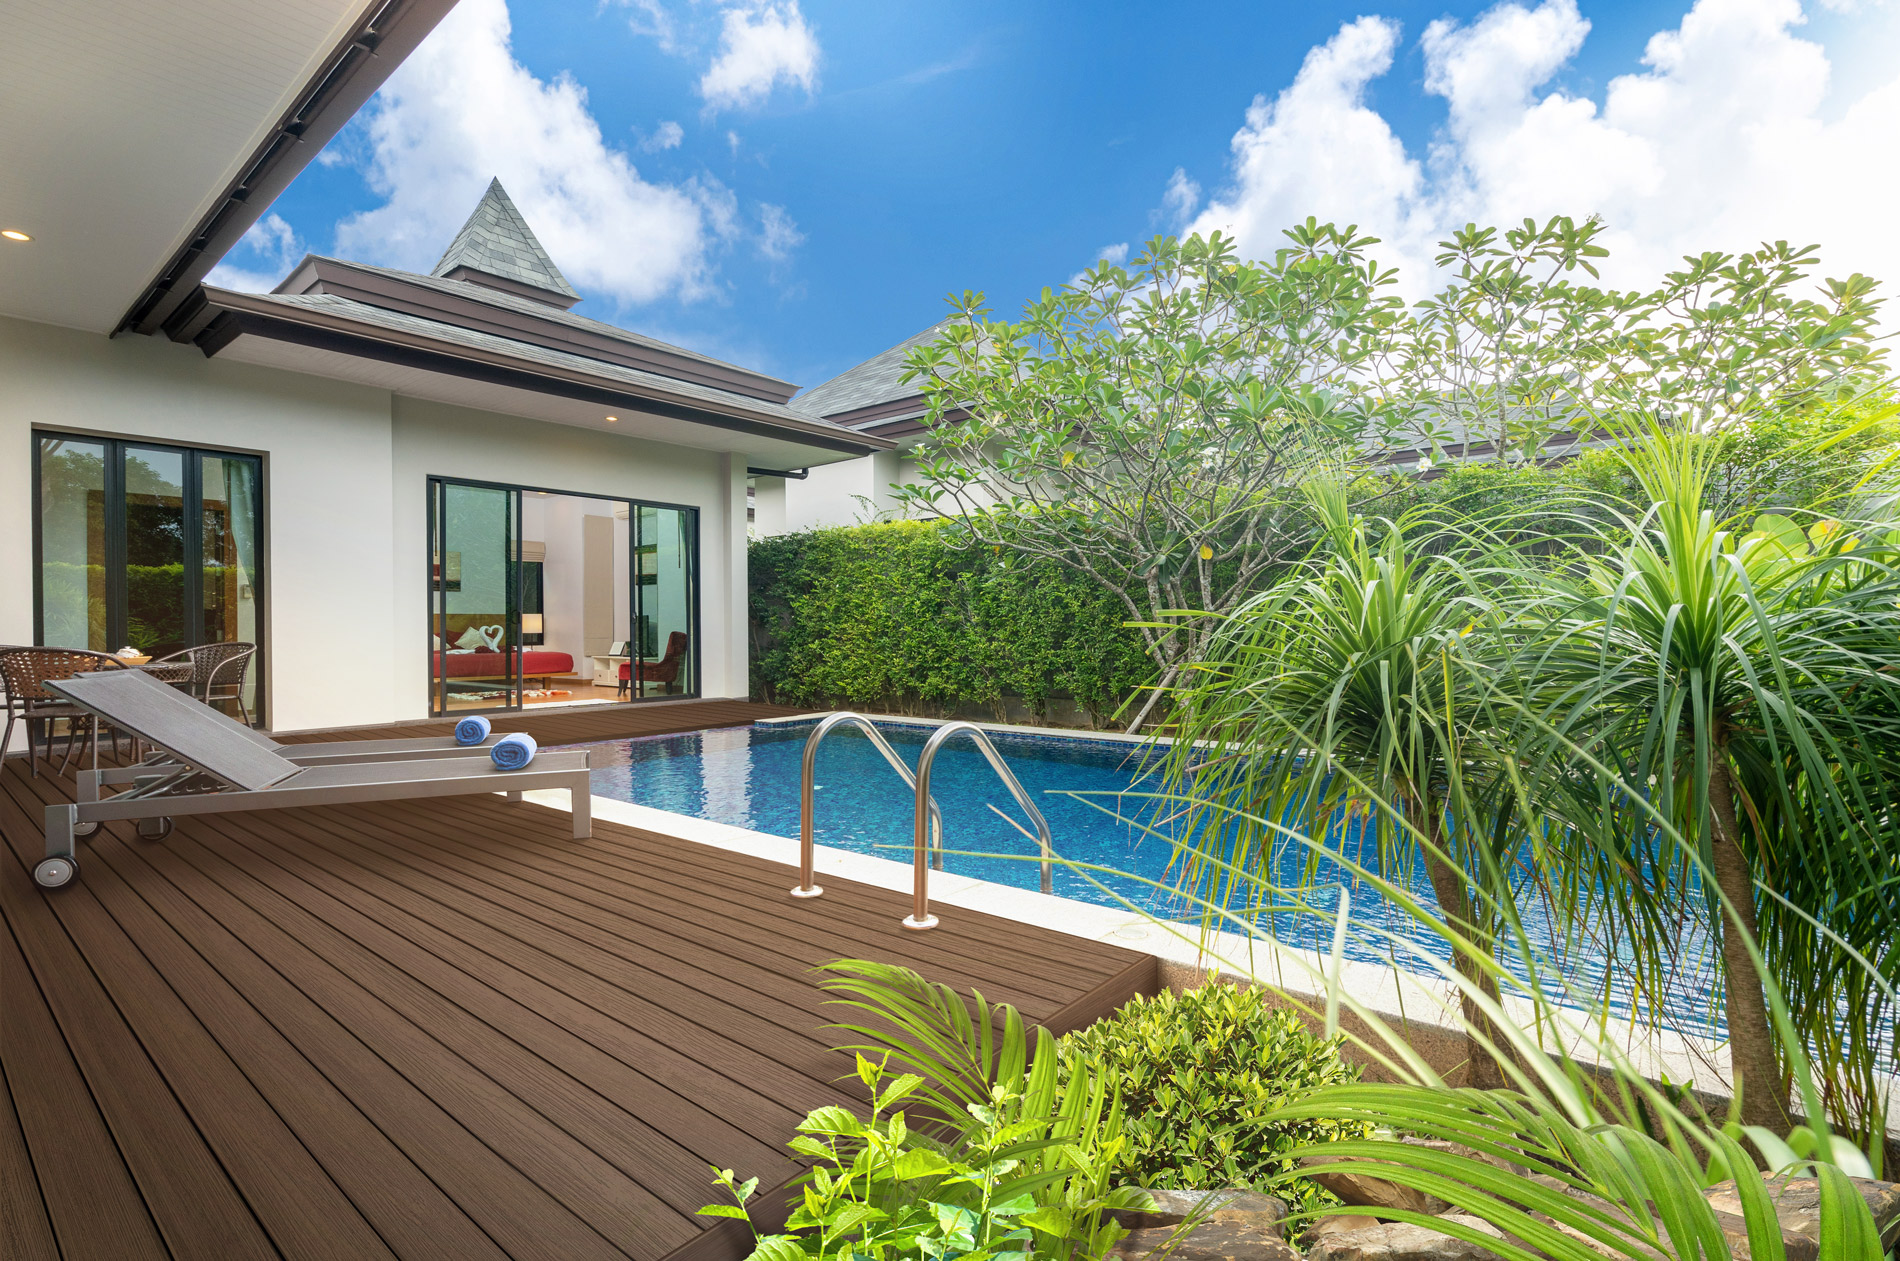 Composite decking shown poolside in a modern backyard with greenery as a perimeter.